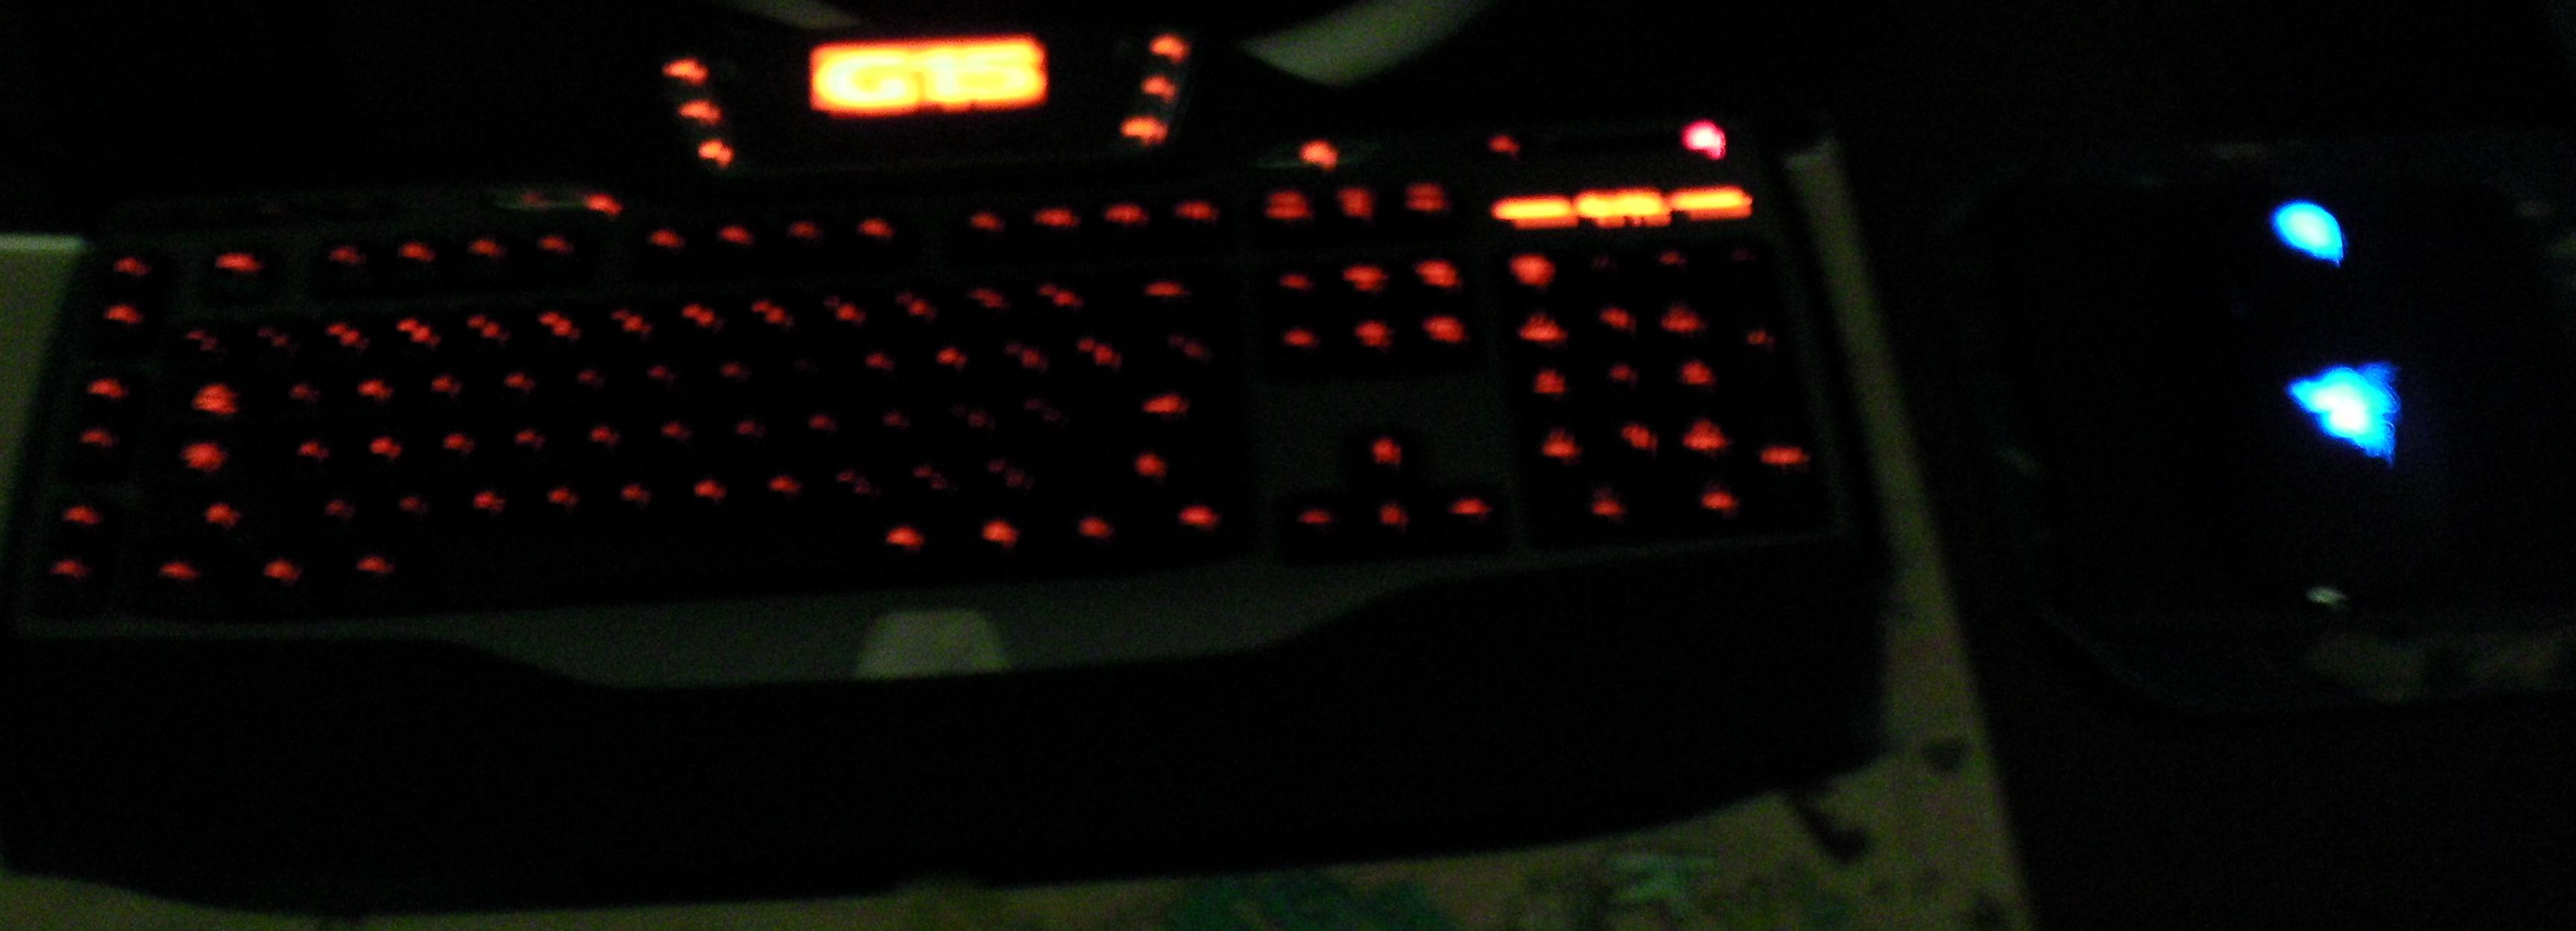 keyboard and mouse.jpg